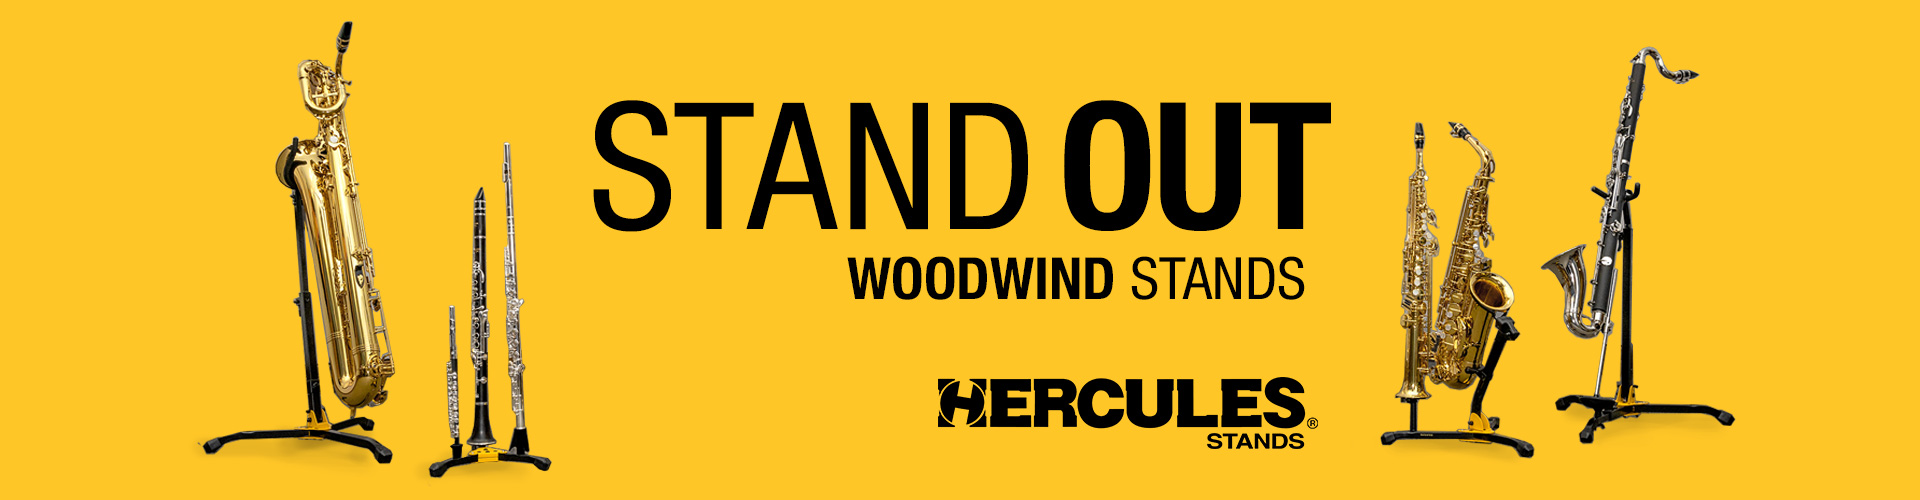 Stand Out: Woodwinds